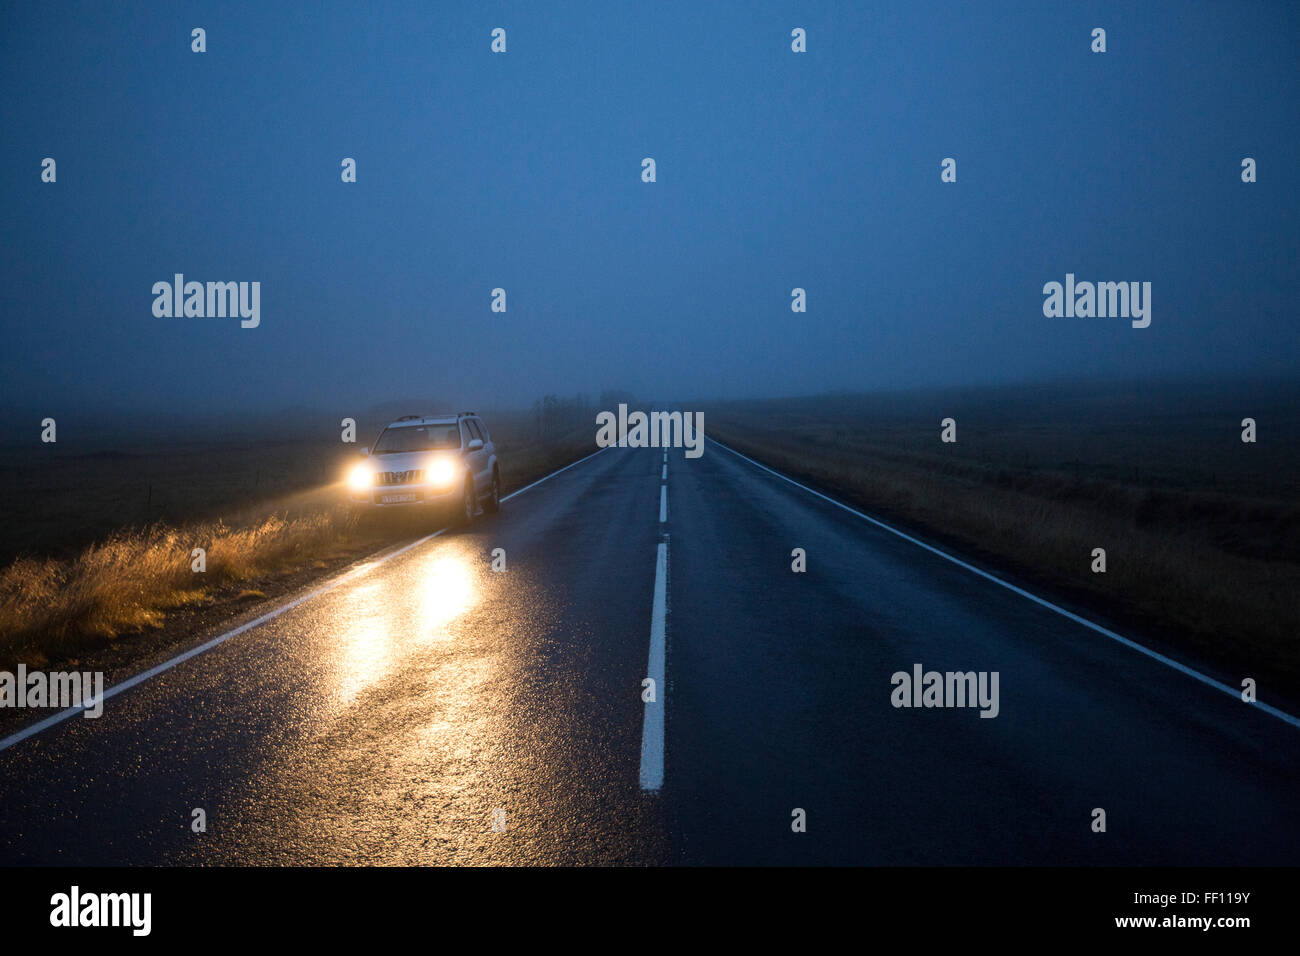 Car on remote road at night Stock Photo